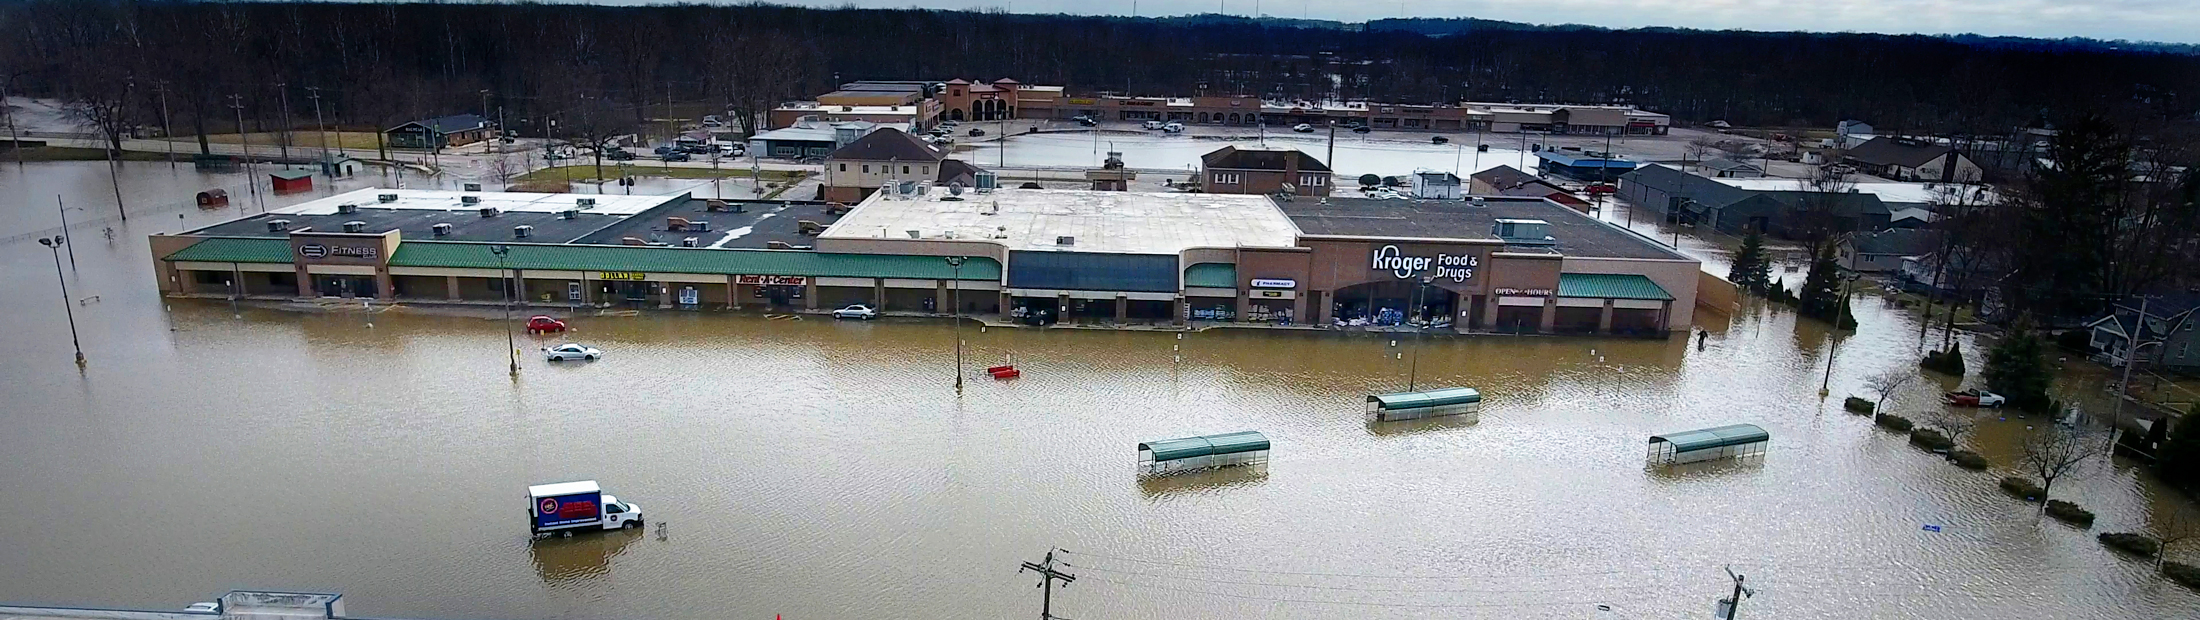 an aerial photograph of a flooded grocery plaza